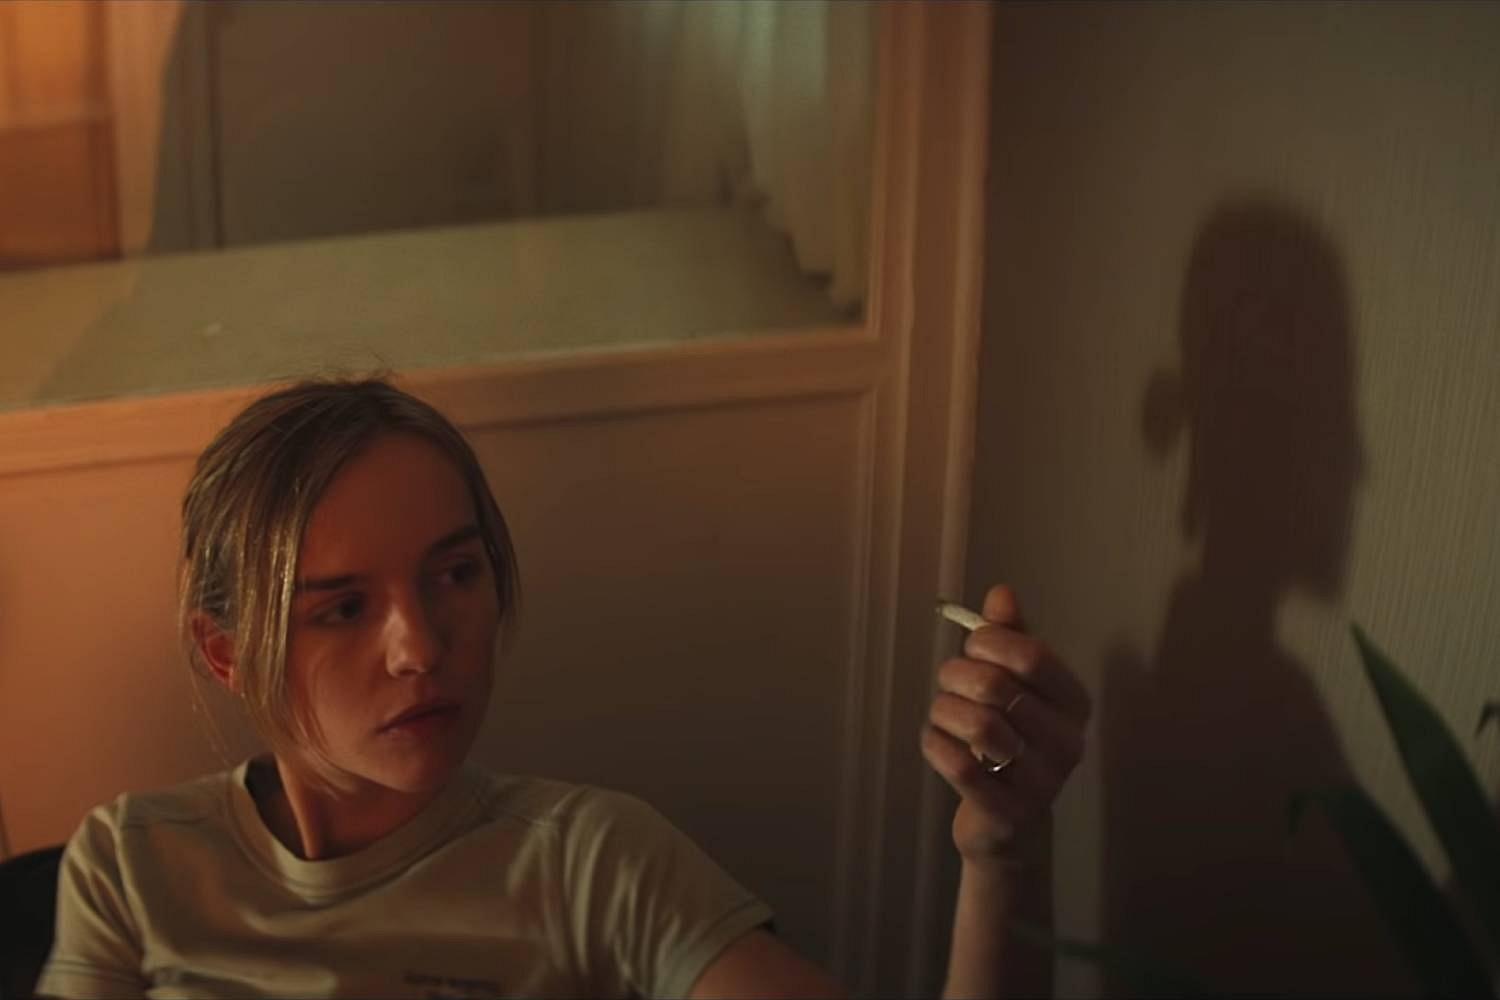 The Japanese House shares new video for ‘Maybe You’re The Reason’